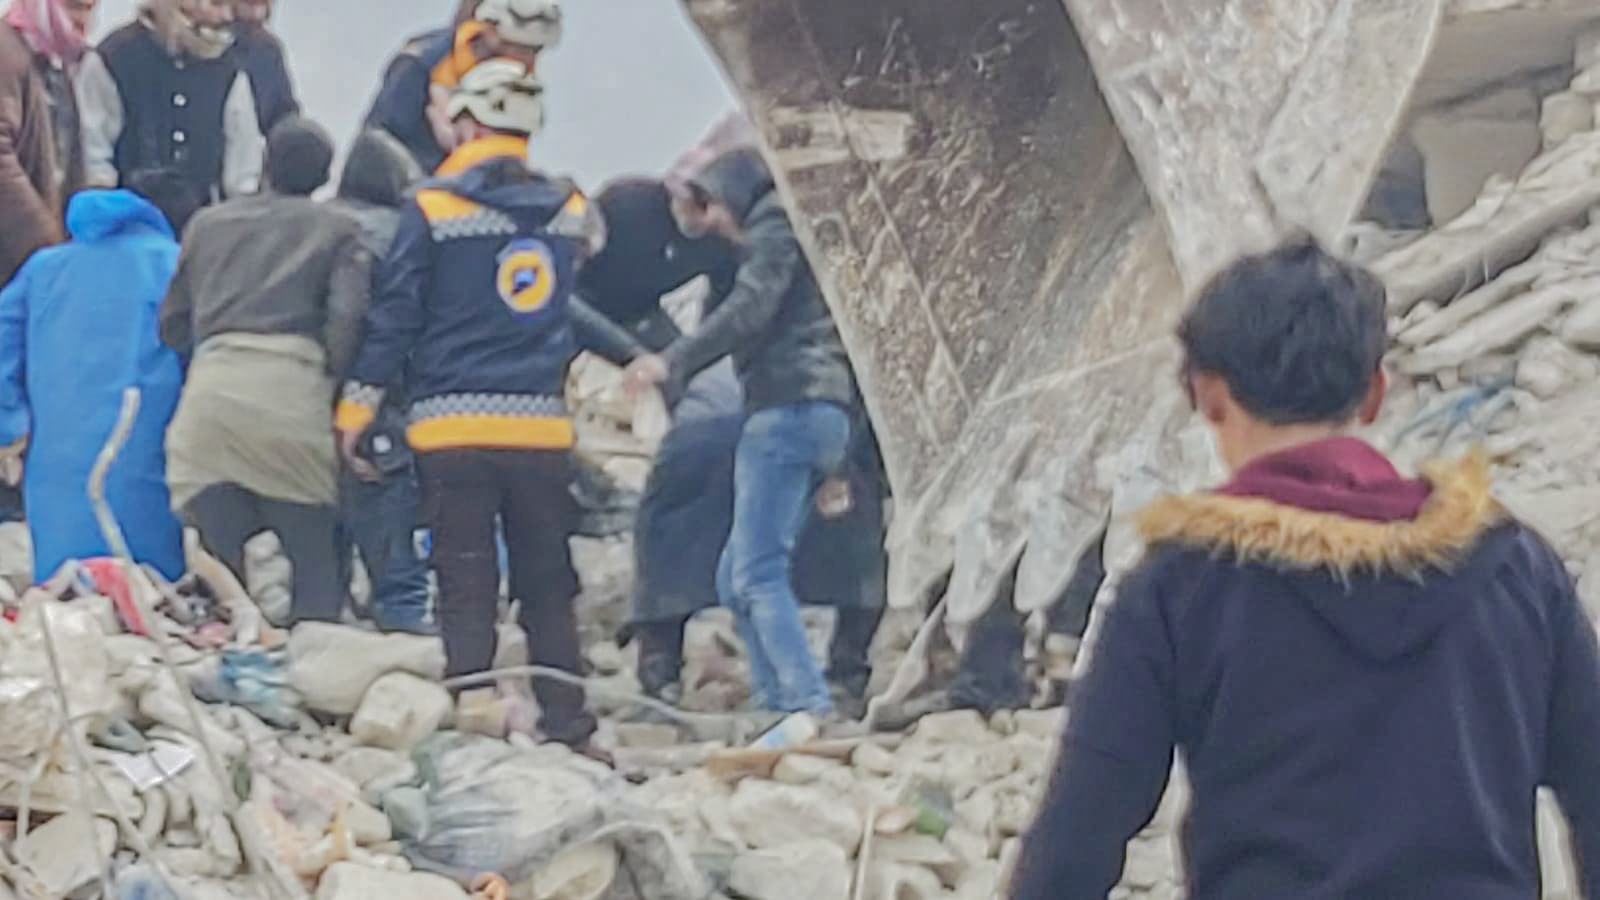 A boy with his back to the camera walks toward a group of people trying to rescue others from under rubble after the earthquake in Syria